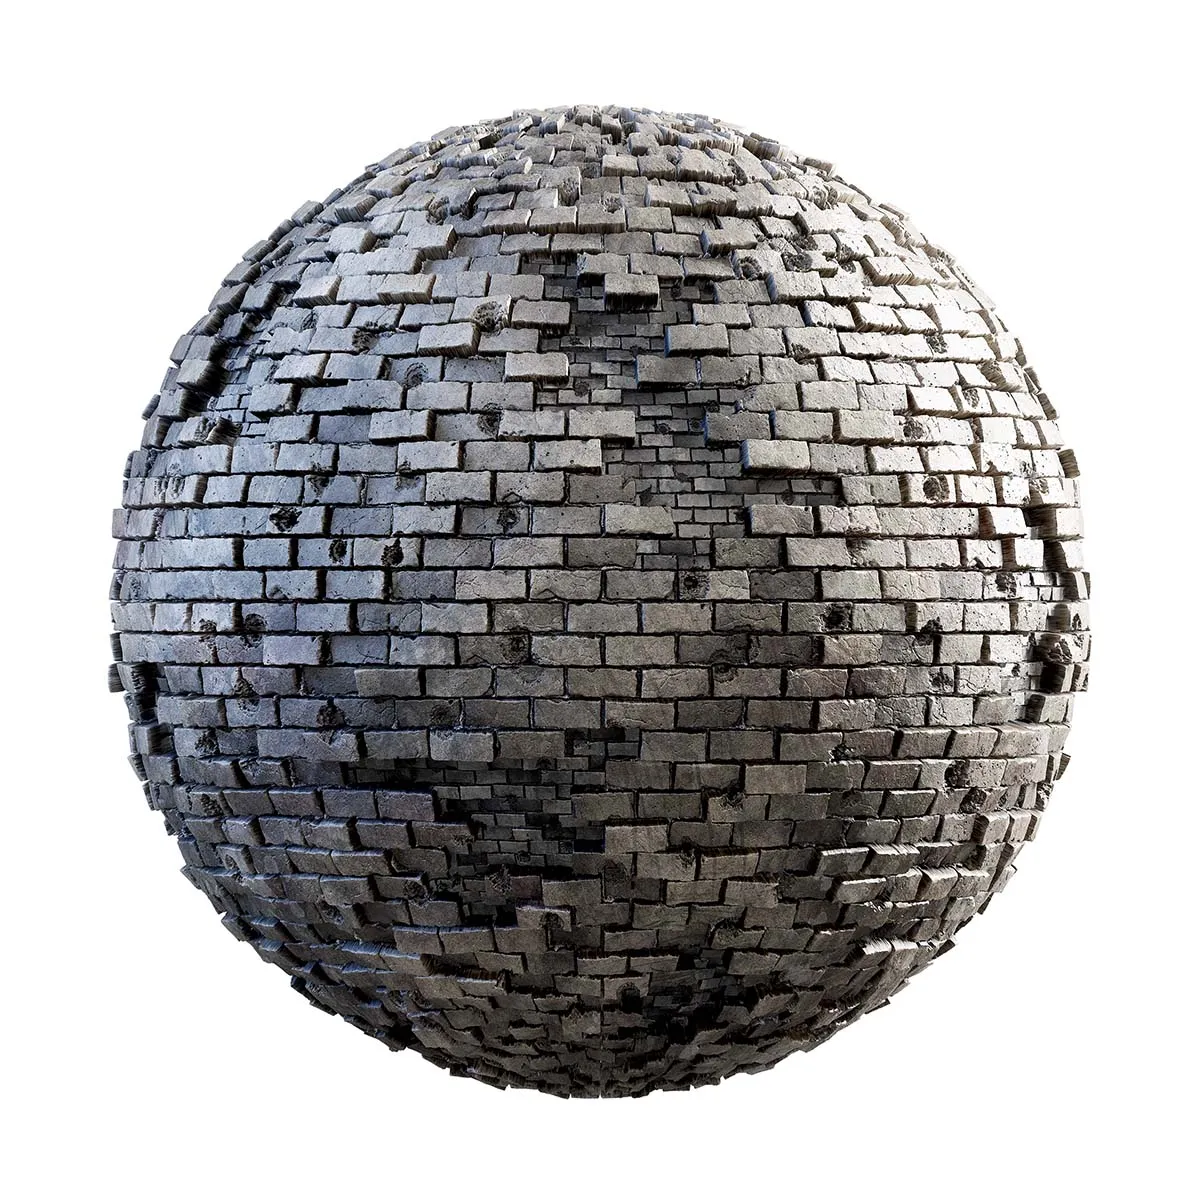 CGAxis PBR 28 – Brick Wall With Bullet Holes 31 18